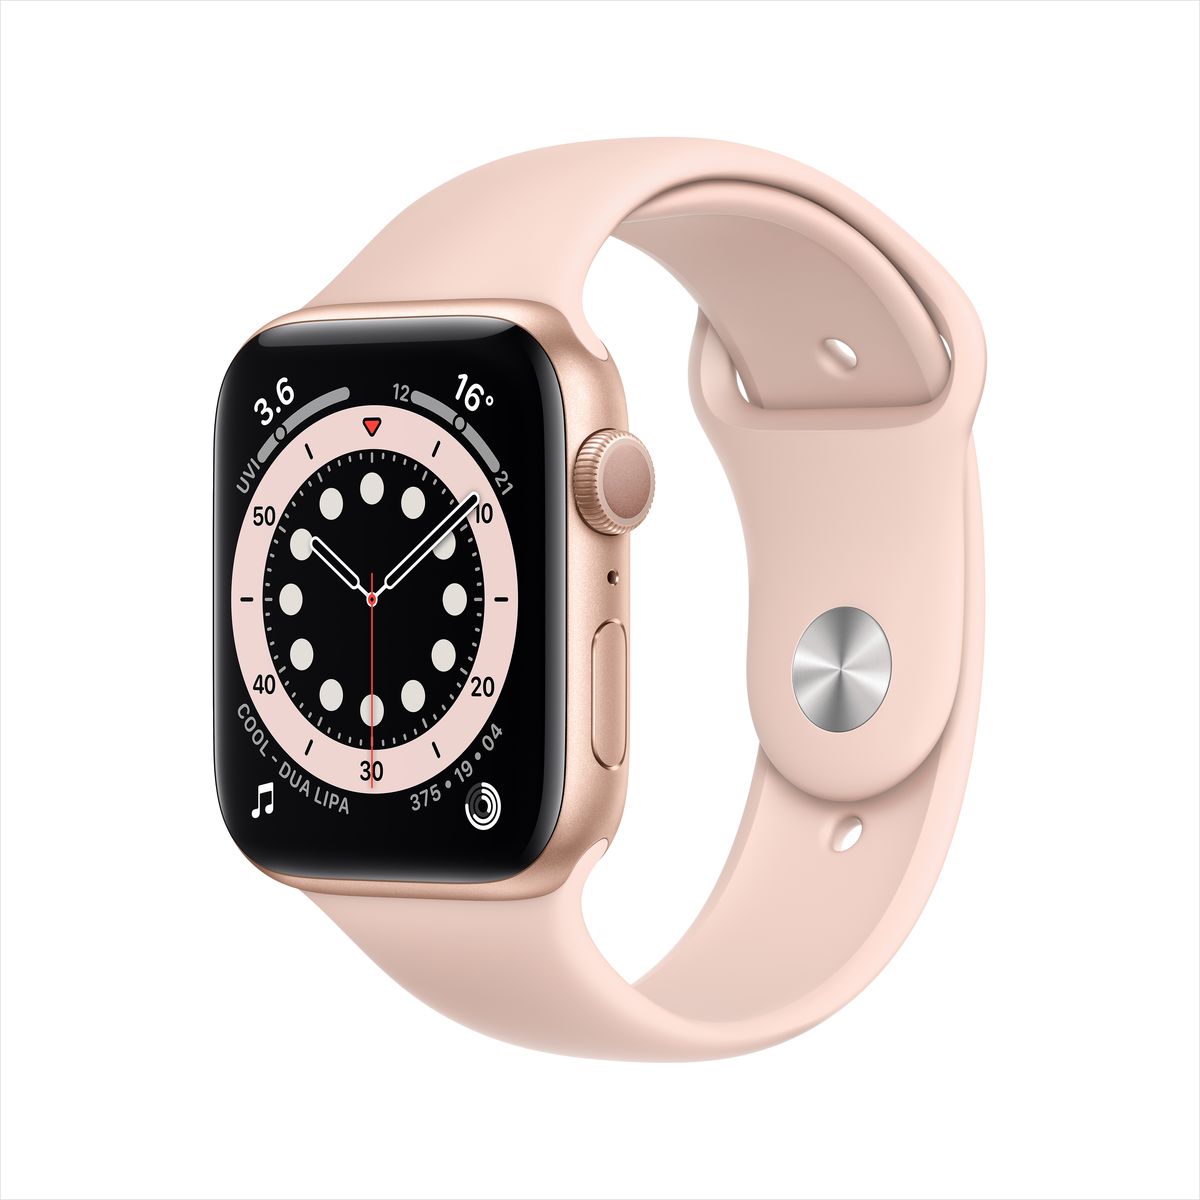 Apple Watch Series 6 GPS 40mm Gold Aluminium Case with Pink Sand Sport Band